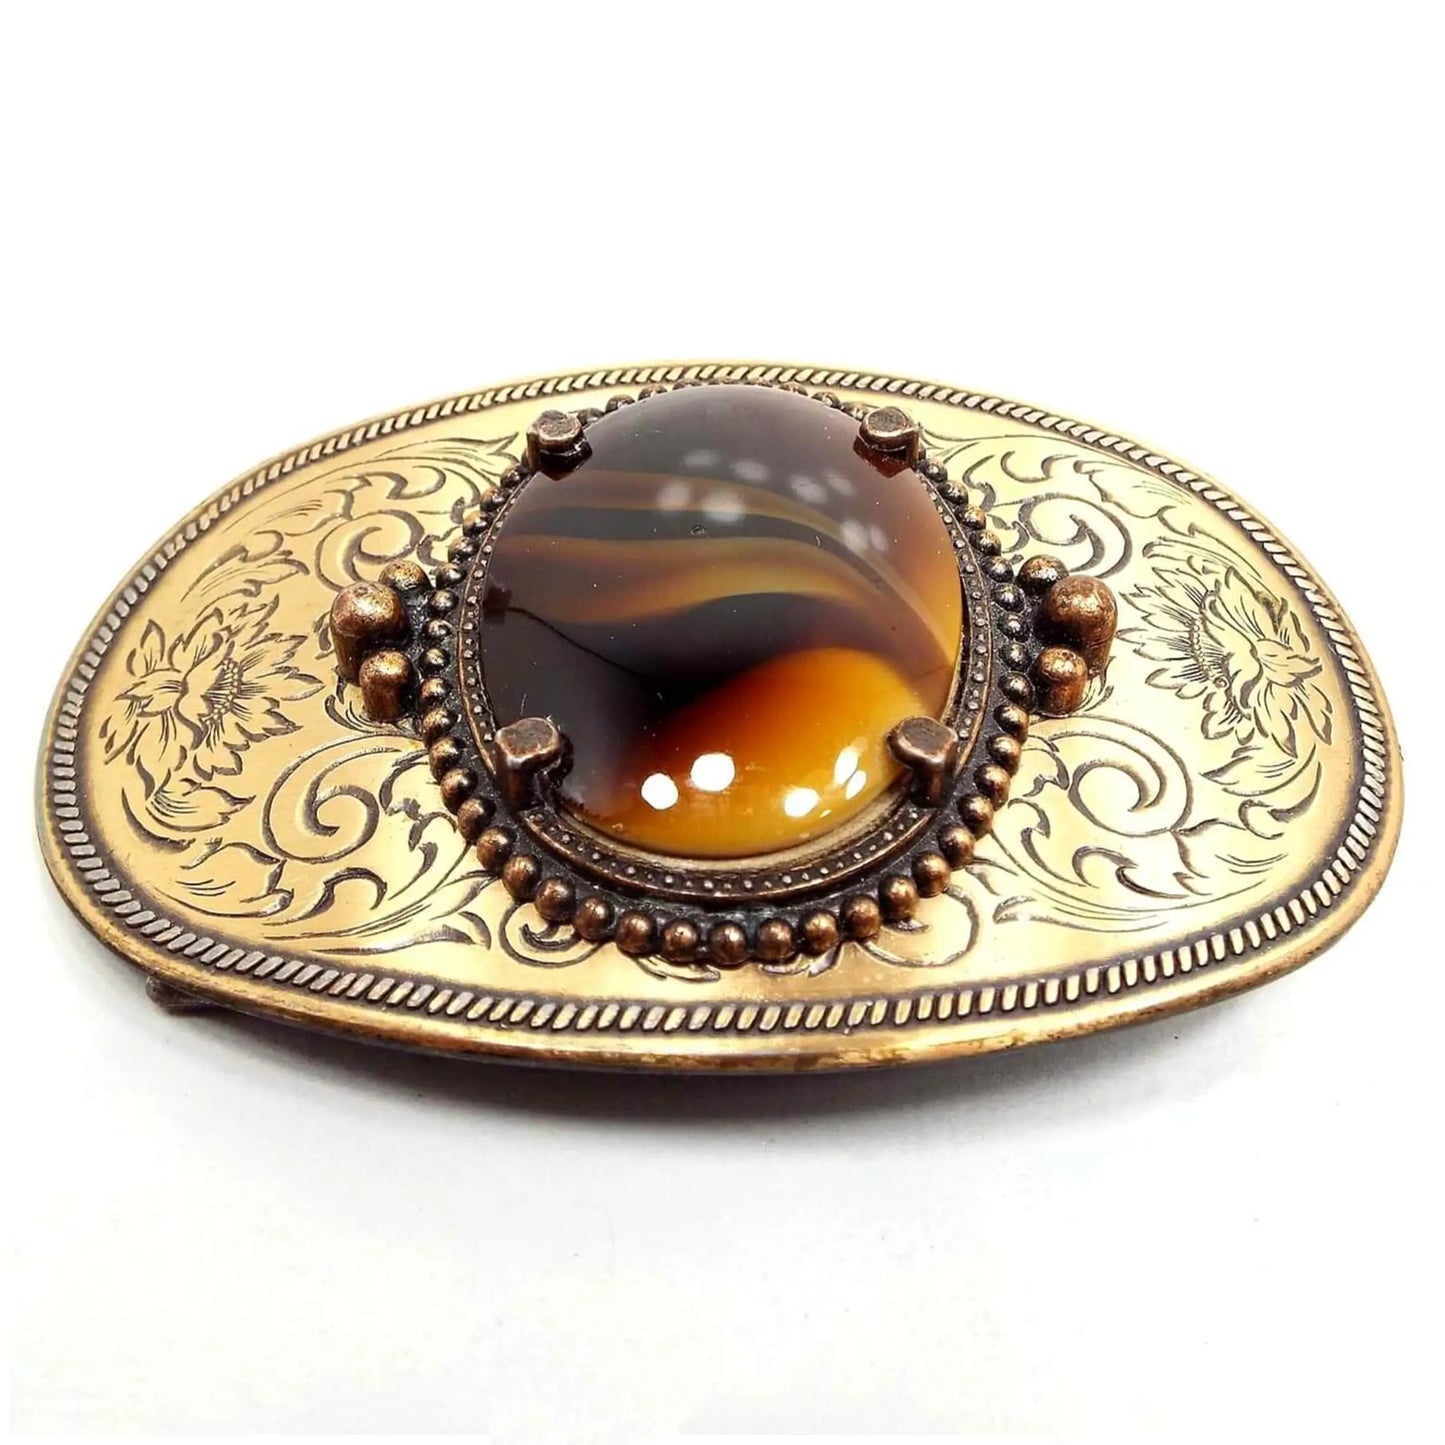 Front view of the retro vintage belt buckle with fancy glass cab. It is oval and has an antiqued gold tone metal color. In the middle is an oval marbled glass cab with shades of brown and yellow. There is an etched floral and leaf design on the metal.